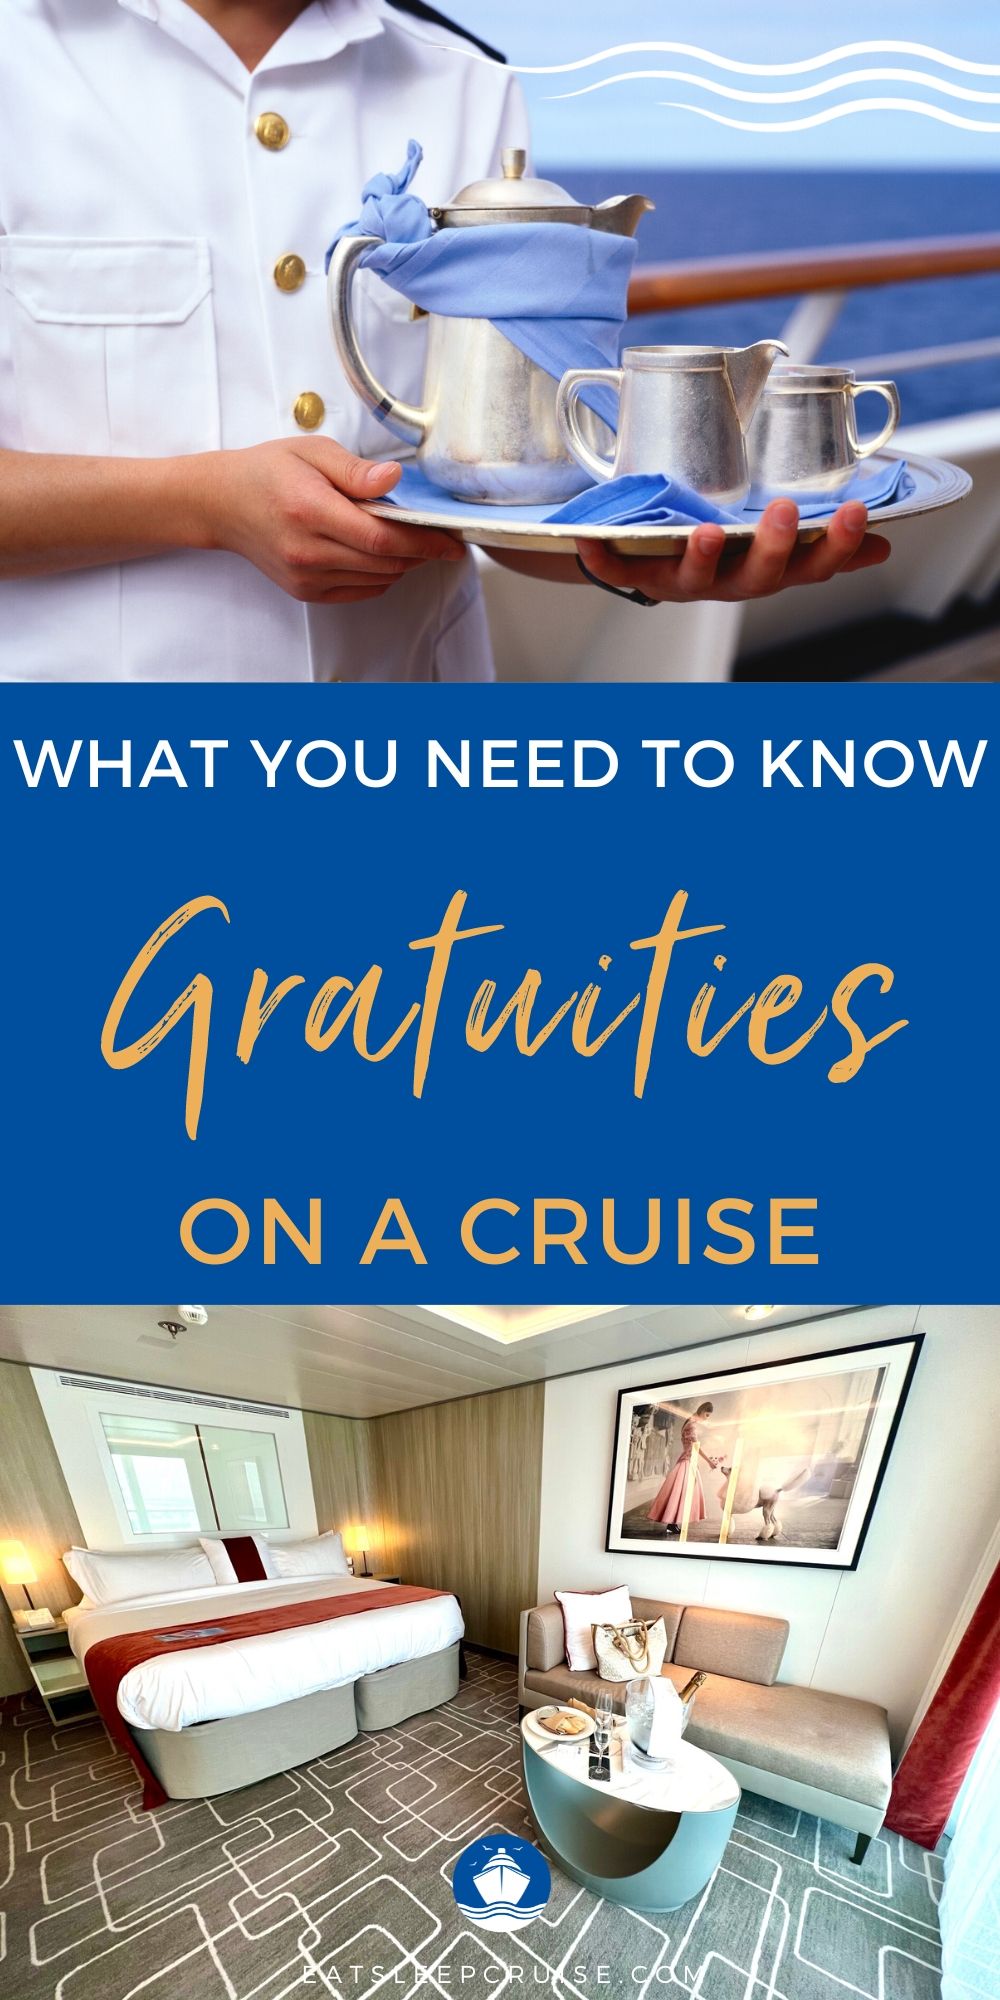 How Much Are Cruise Gratuities in 2023?